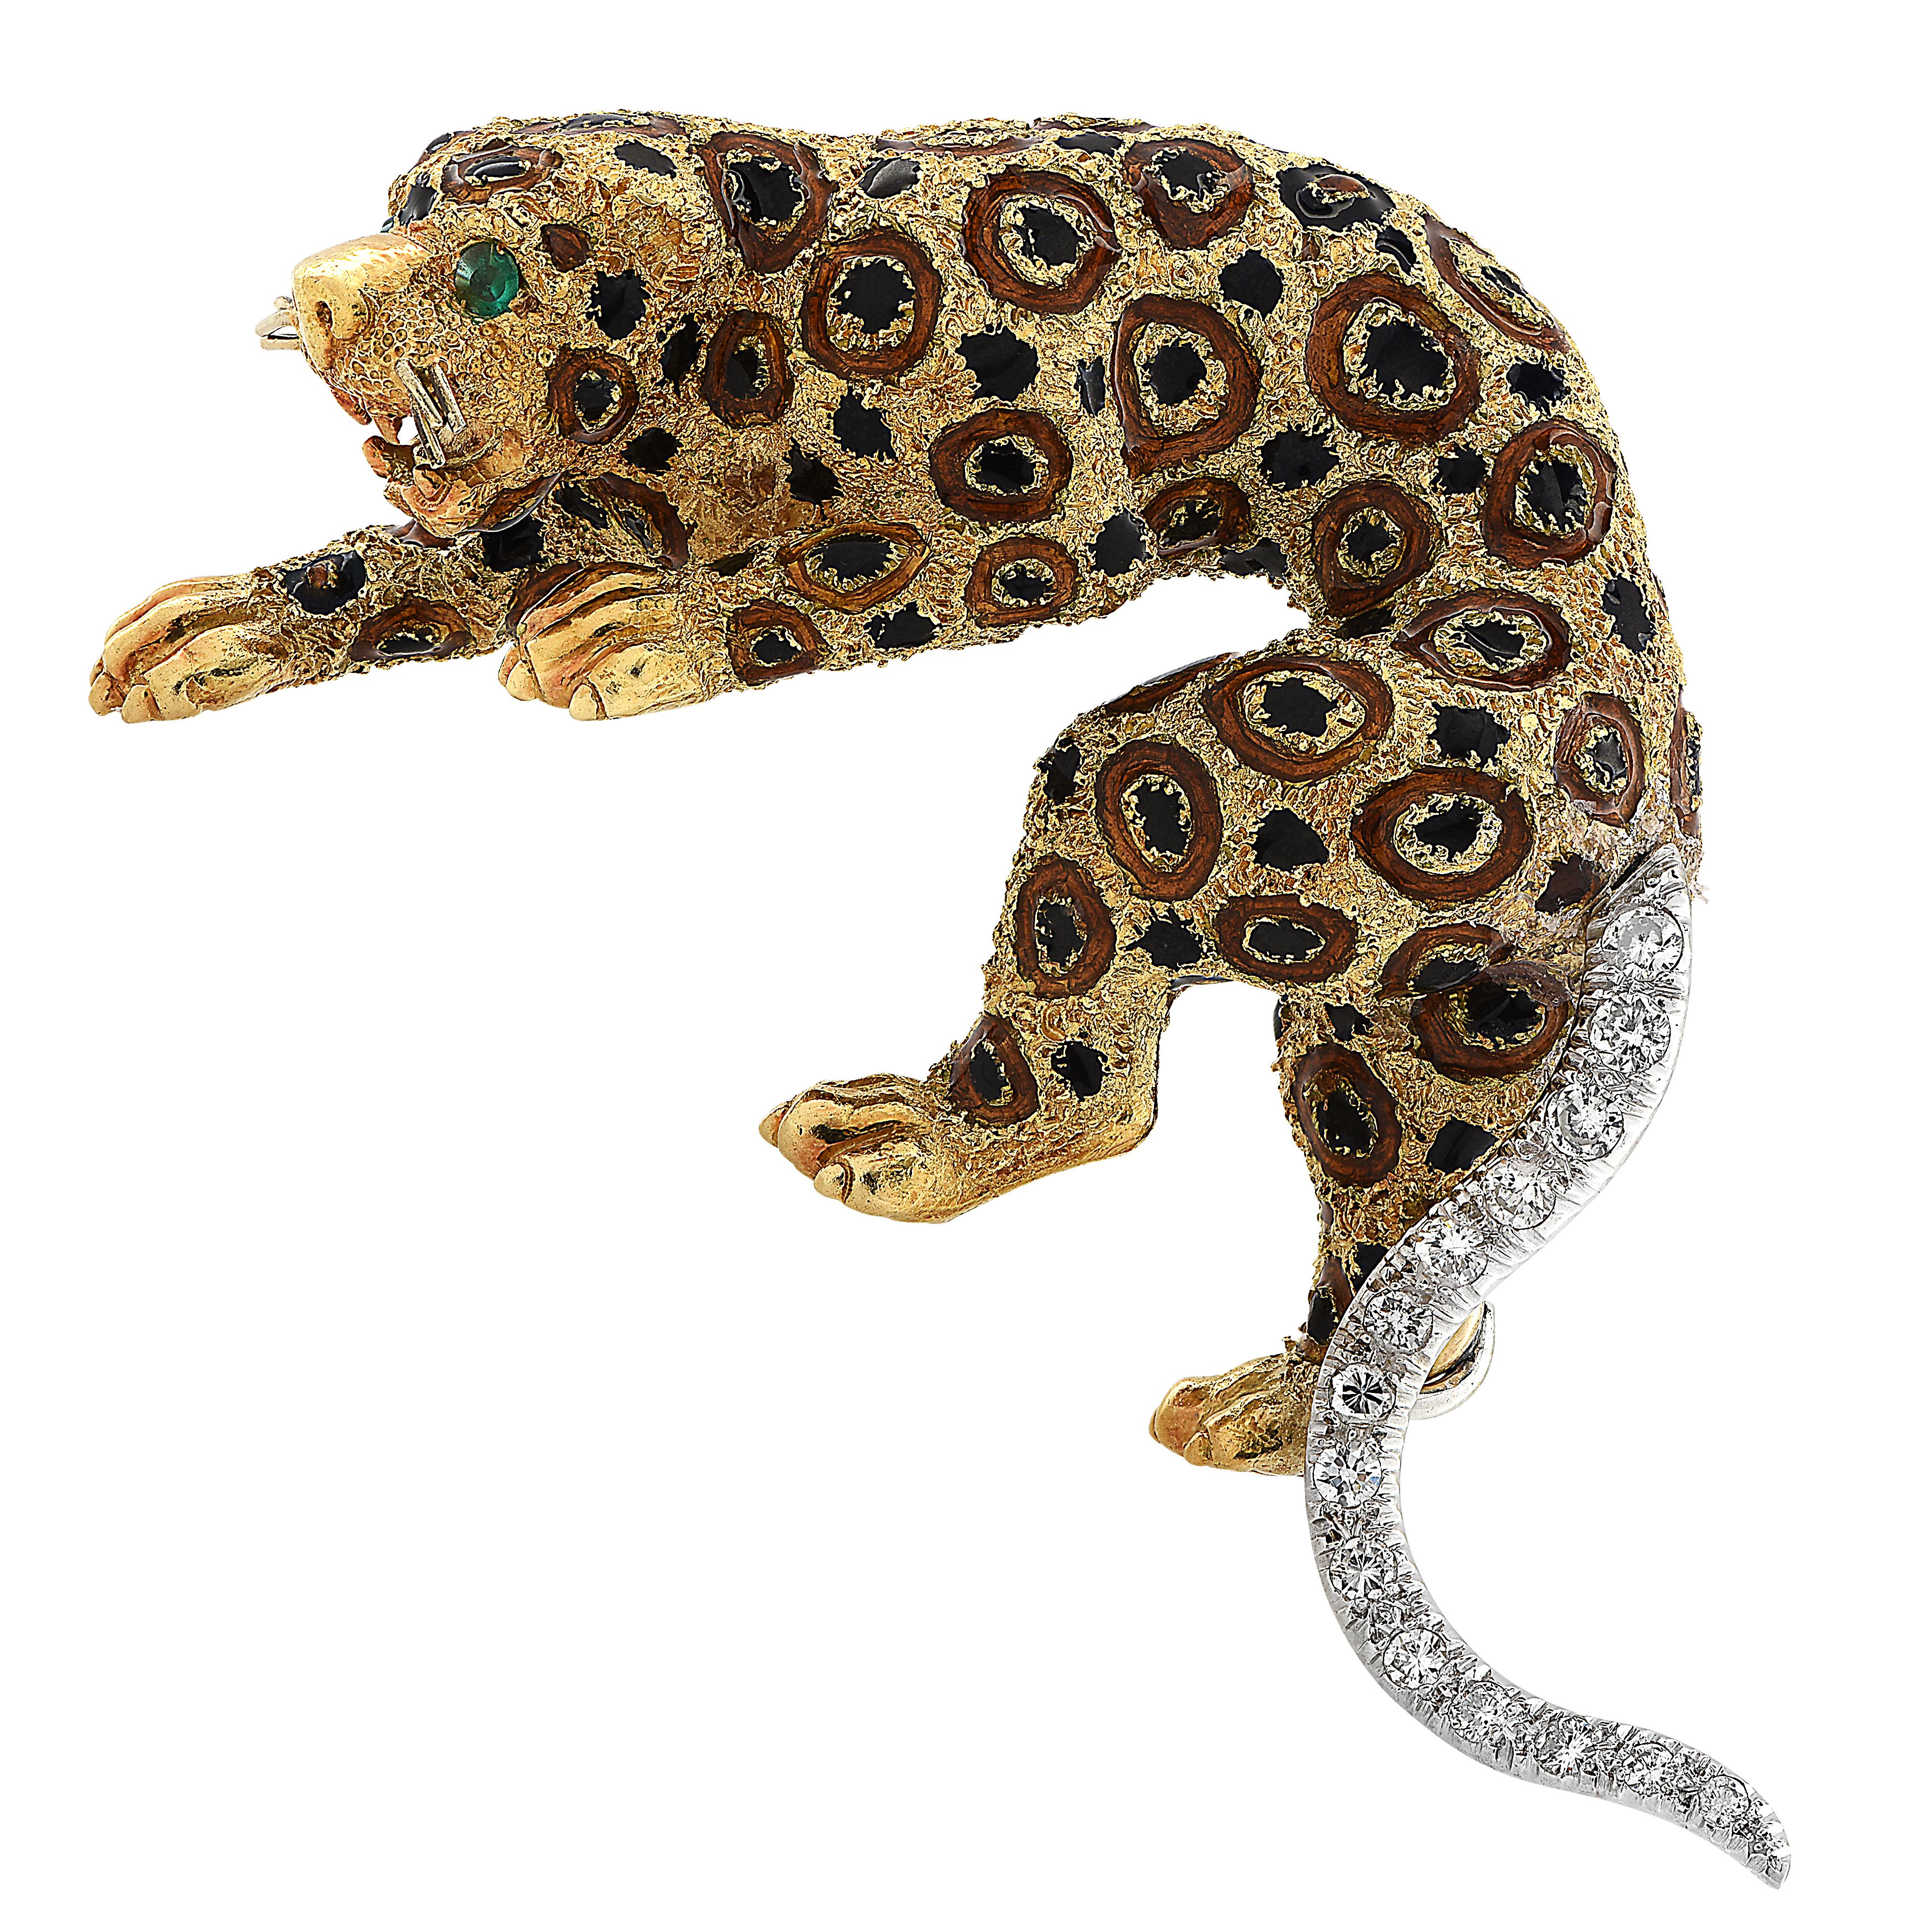 Captivating Leopard Brooch crafted in 18 karat yellow gold, accented with green emerald eyes and black and brown enamel spots, and a diamond encrusted tail featuring 14 round brilliant cut diamonds weighing approximately 1 carat total, F-G color and